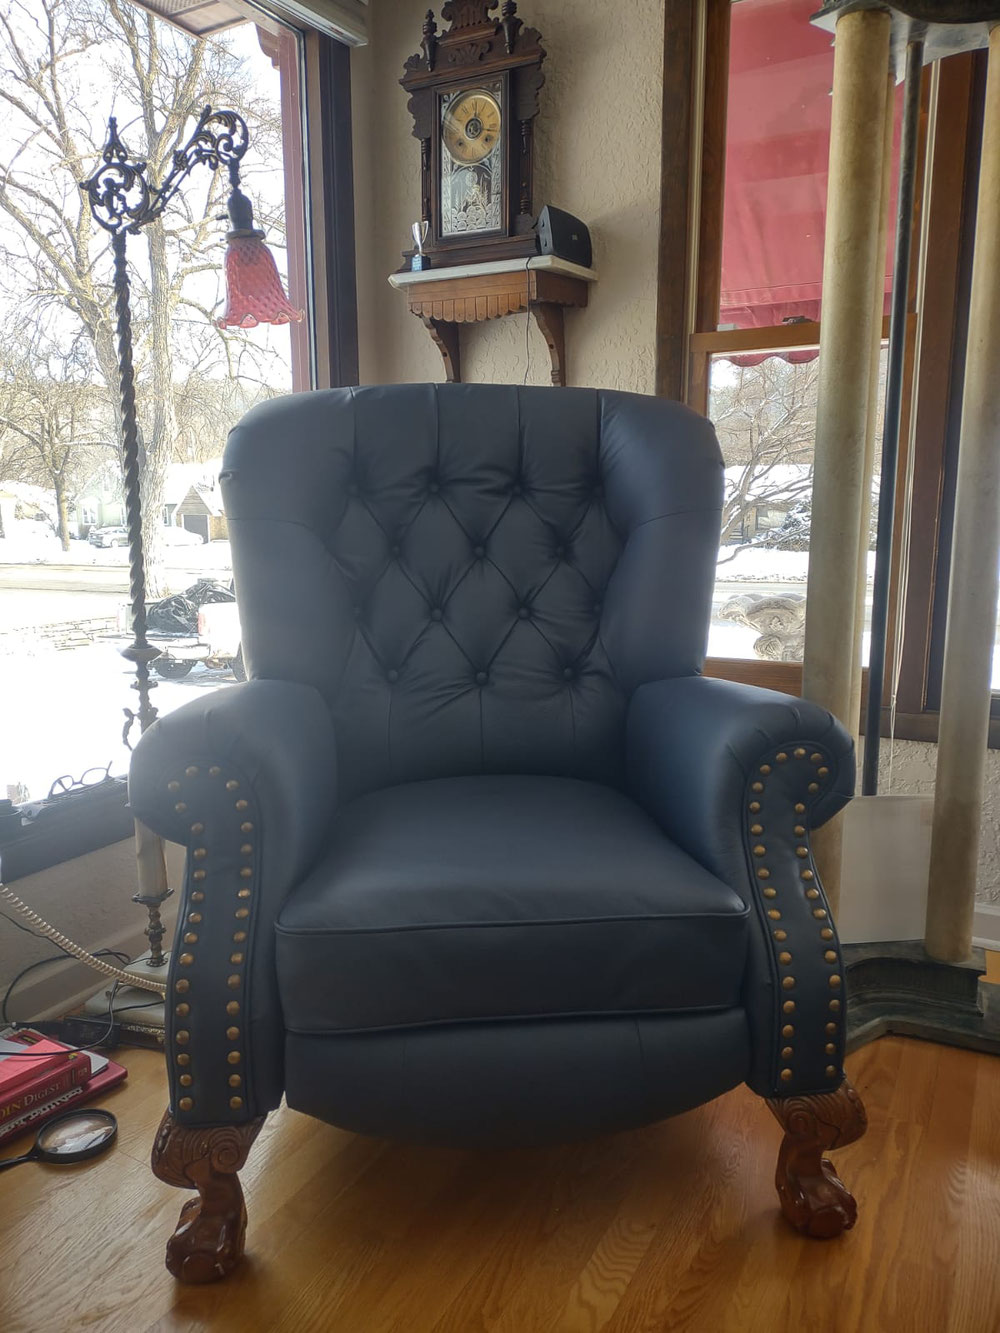 A newly completed chair back in its home. 